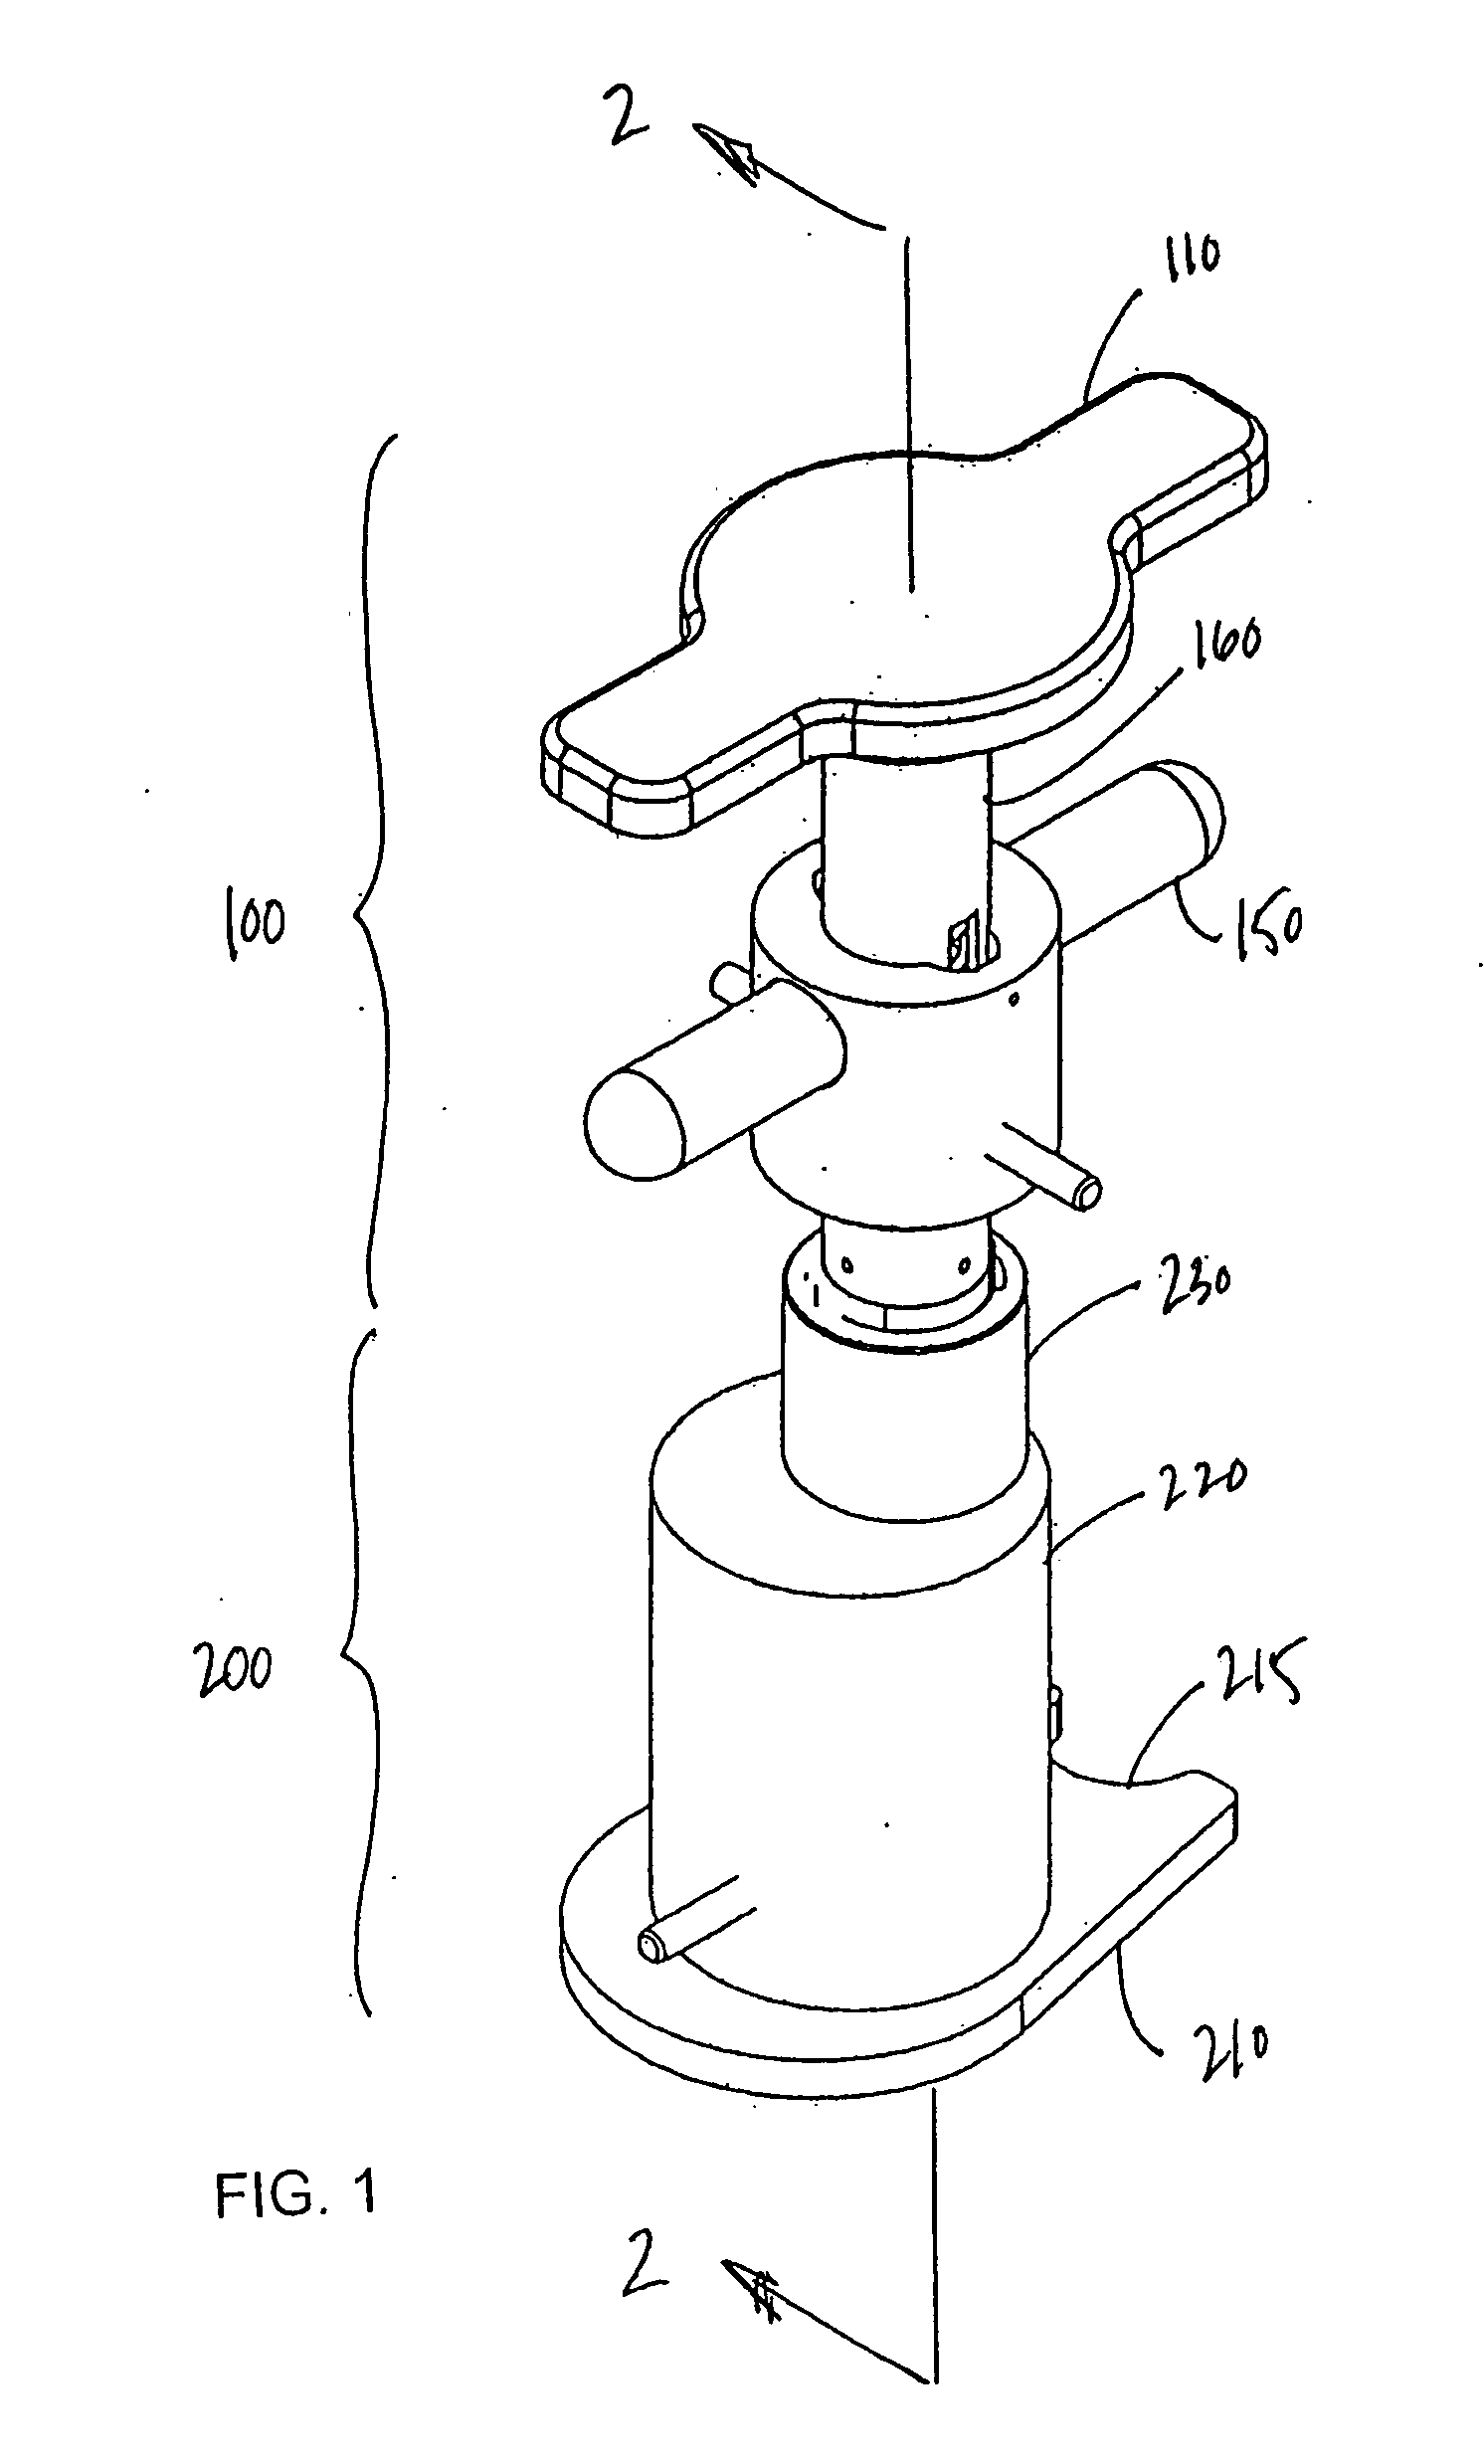 Intraosseous infusion device